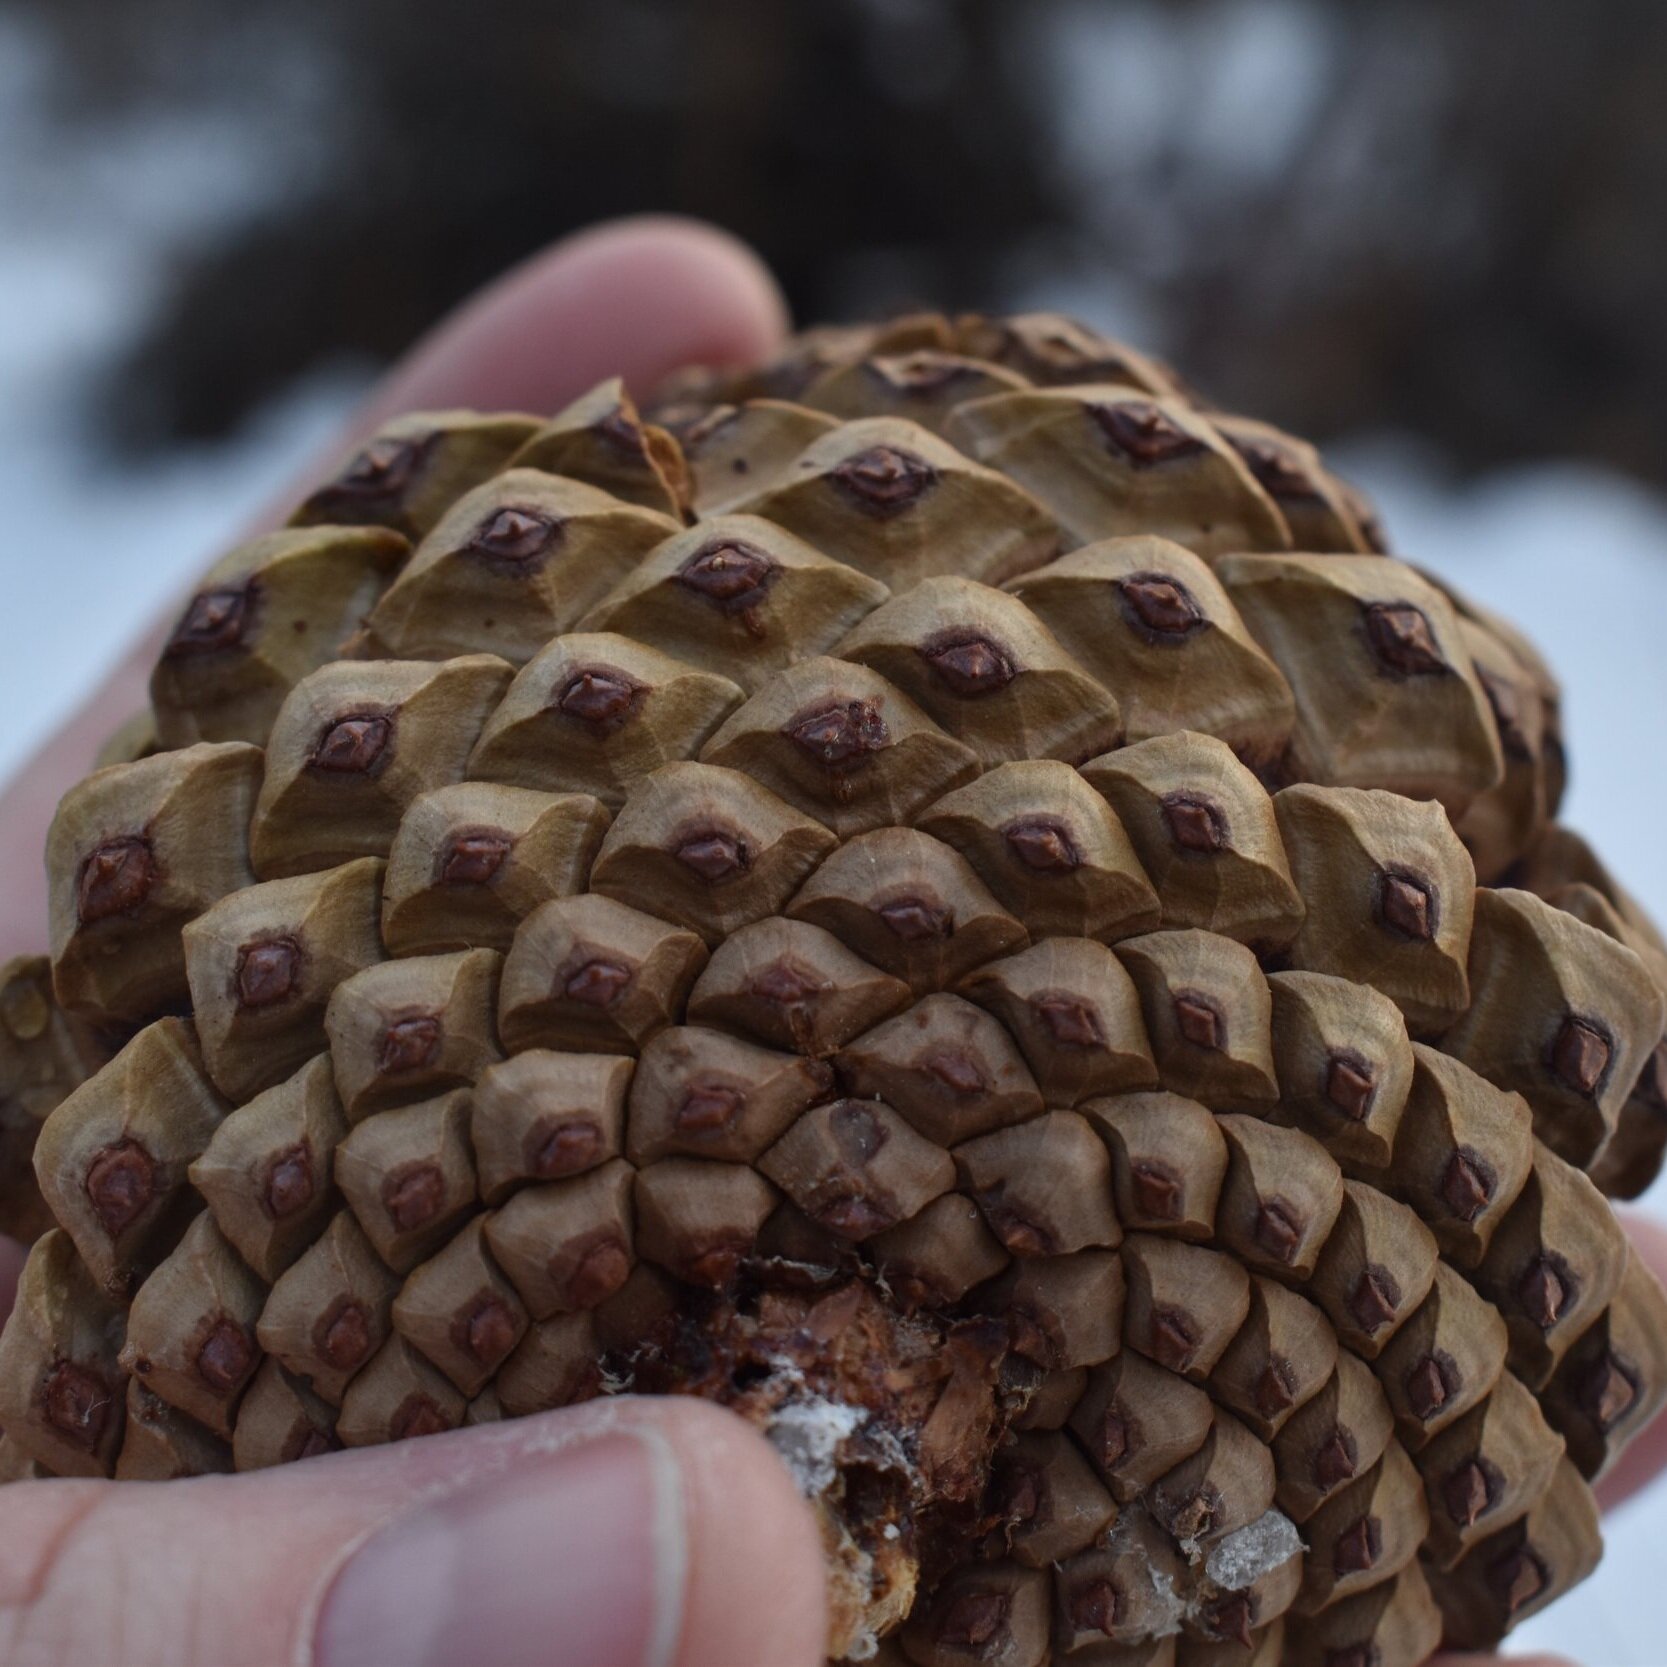 Pine Cone Craft That Turns Into A Snake